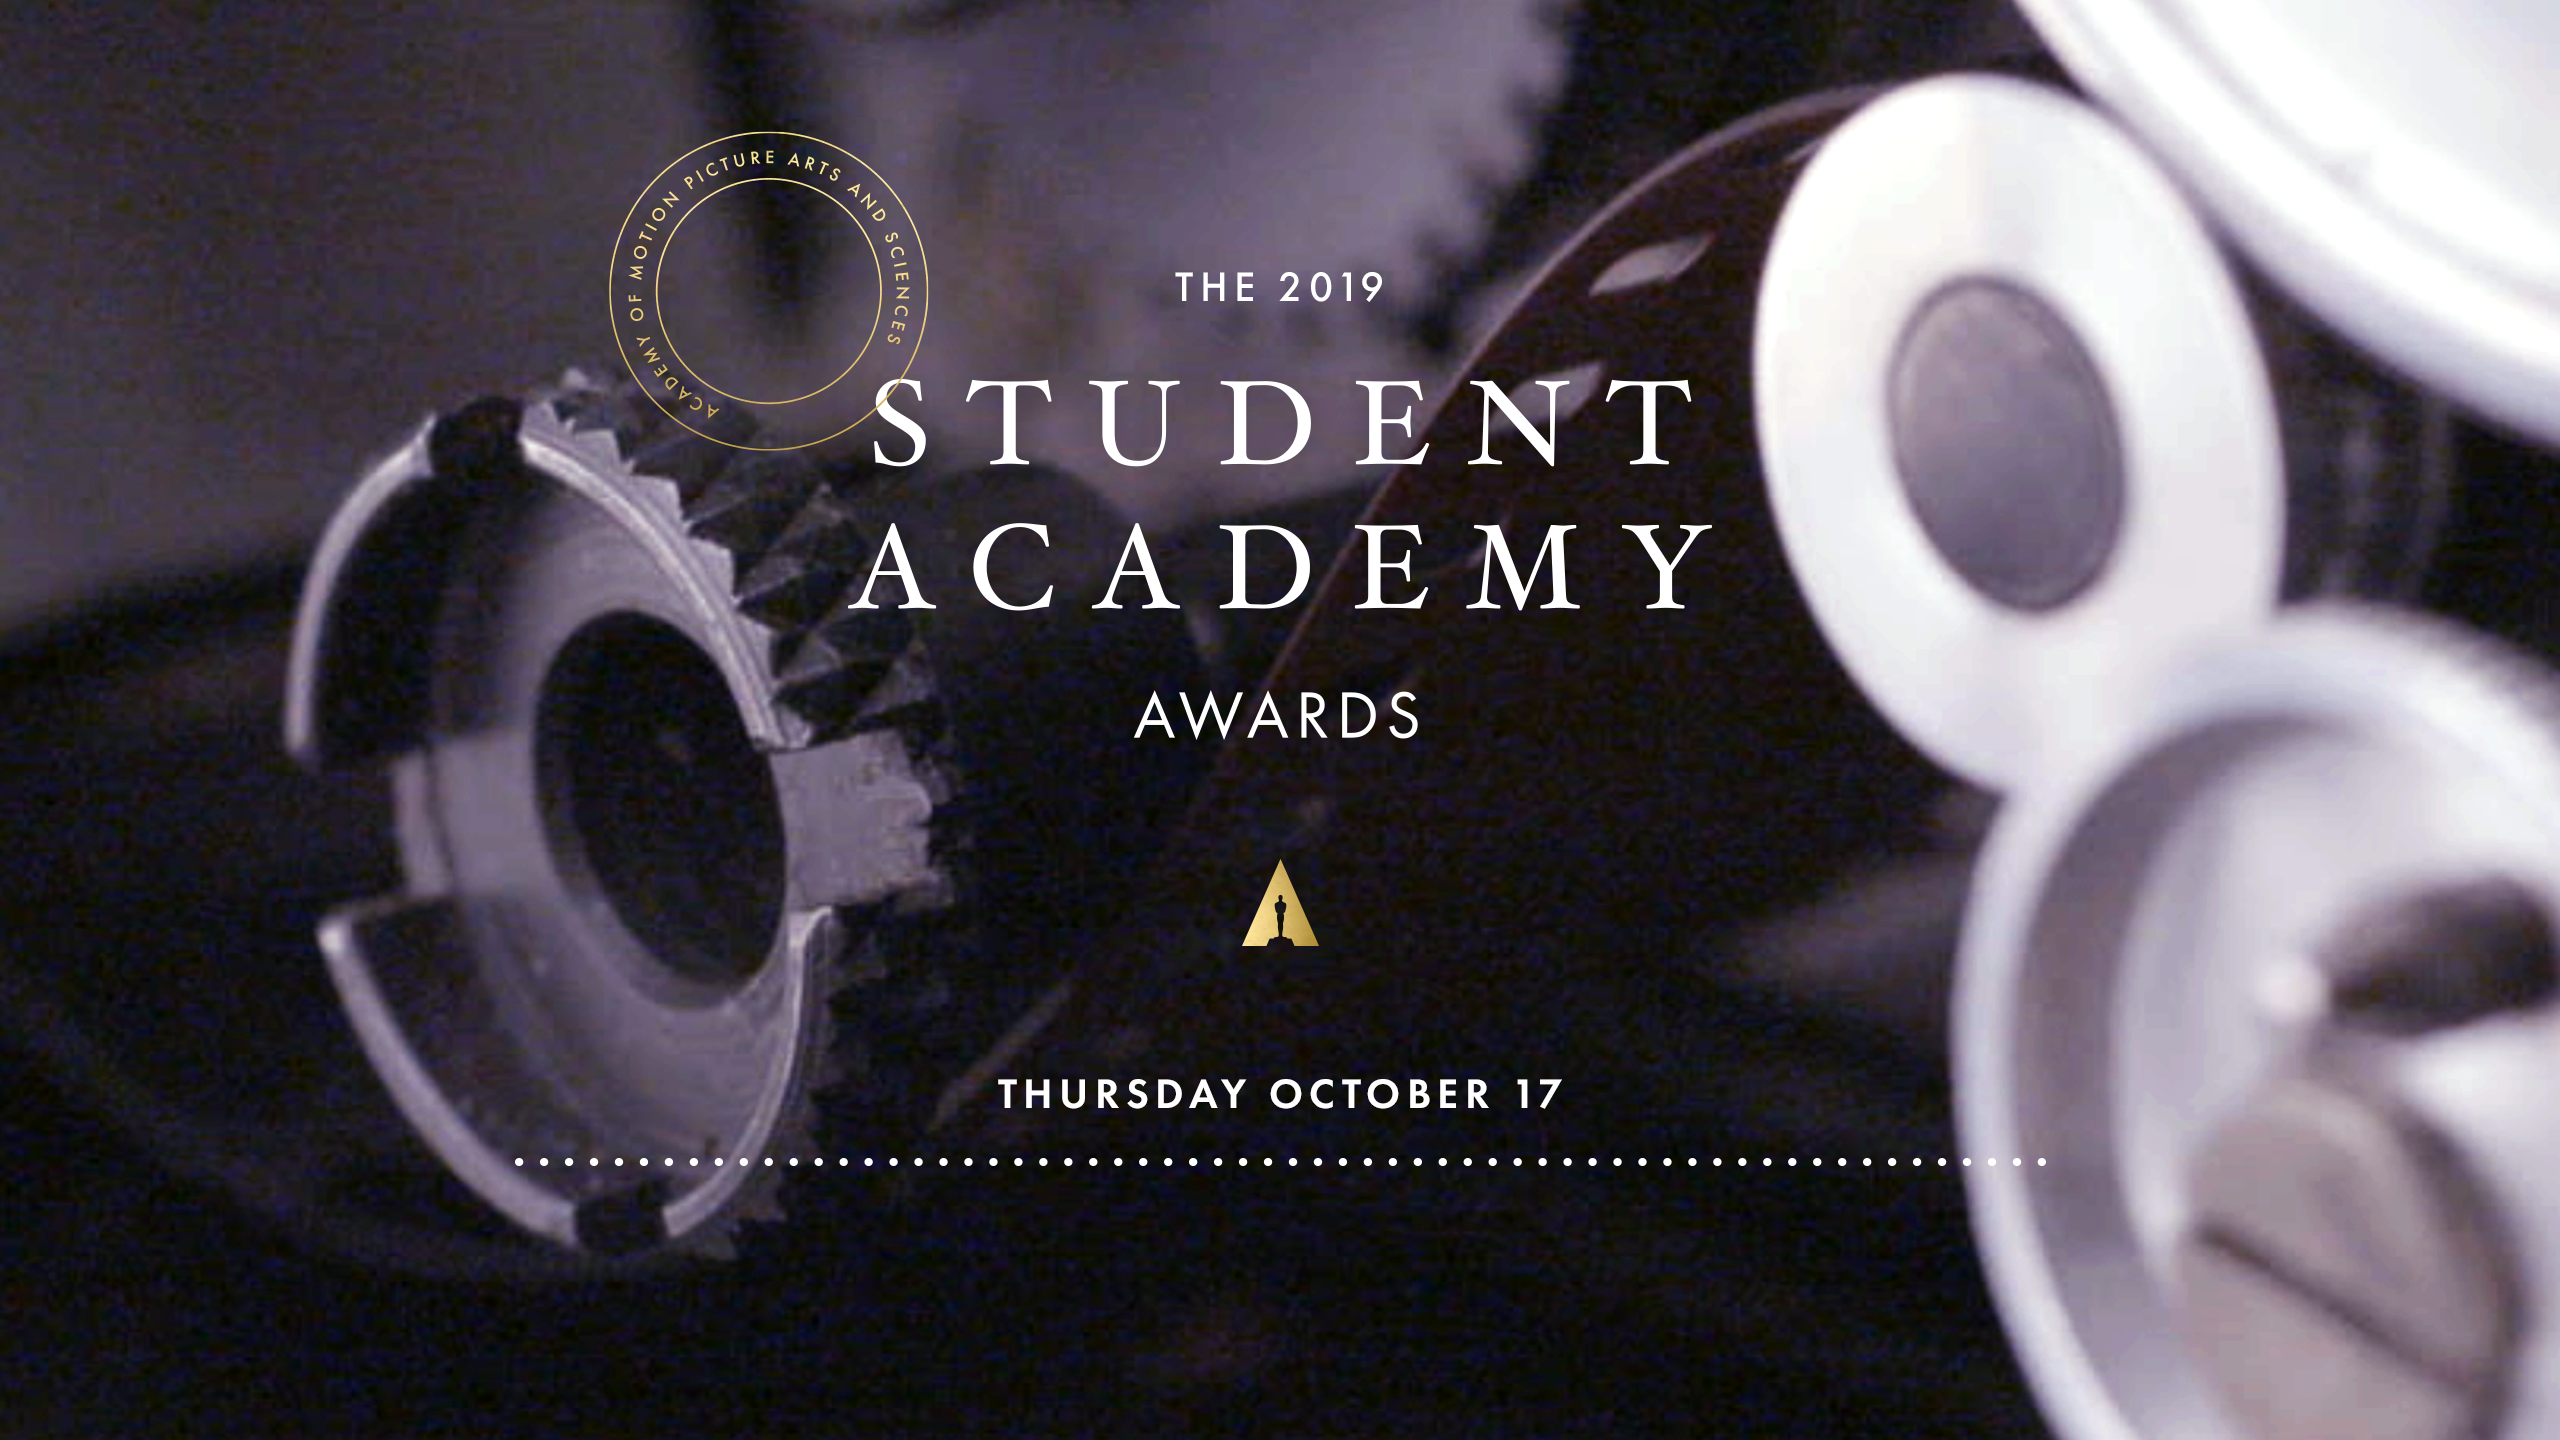 MEDALISTS REVEALED AT 2019 STUDENT ACADEMY AWARDS